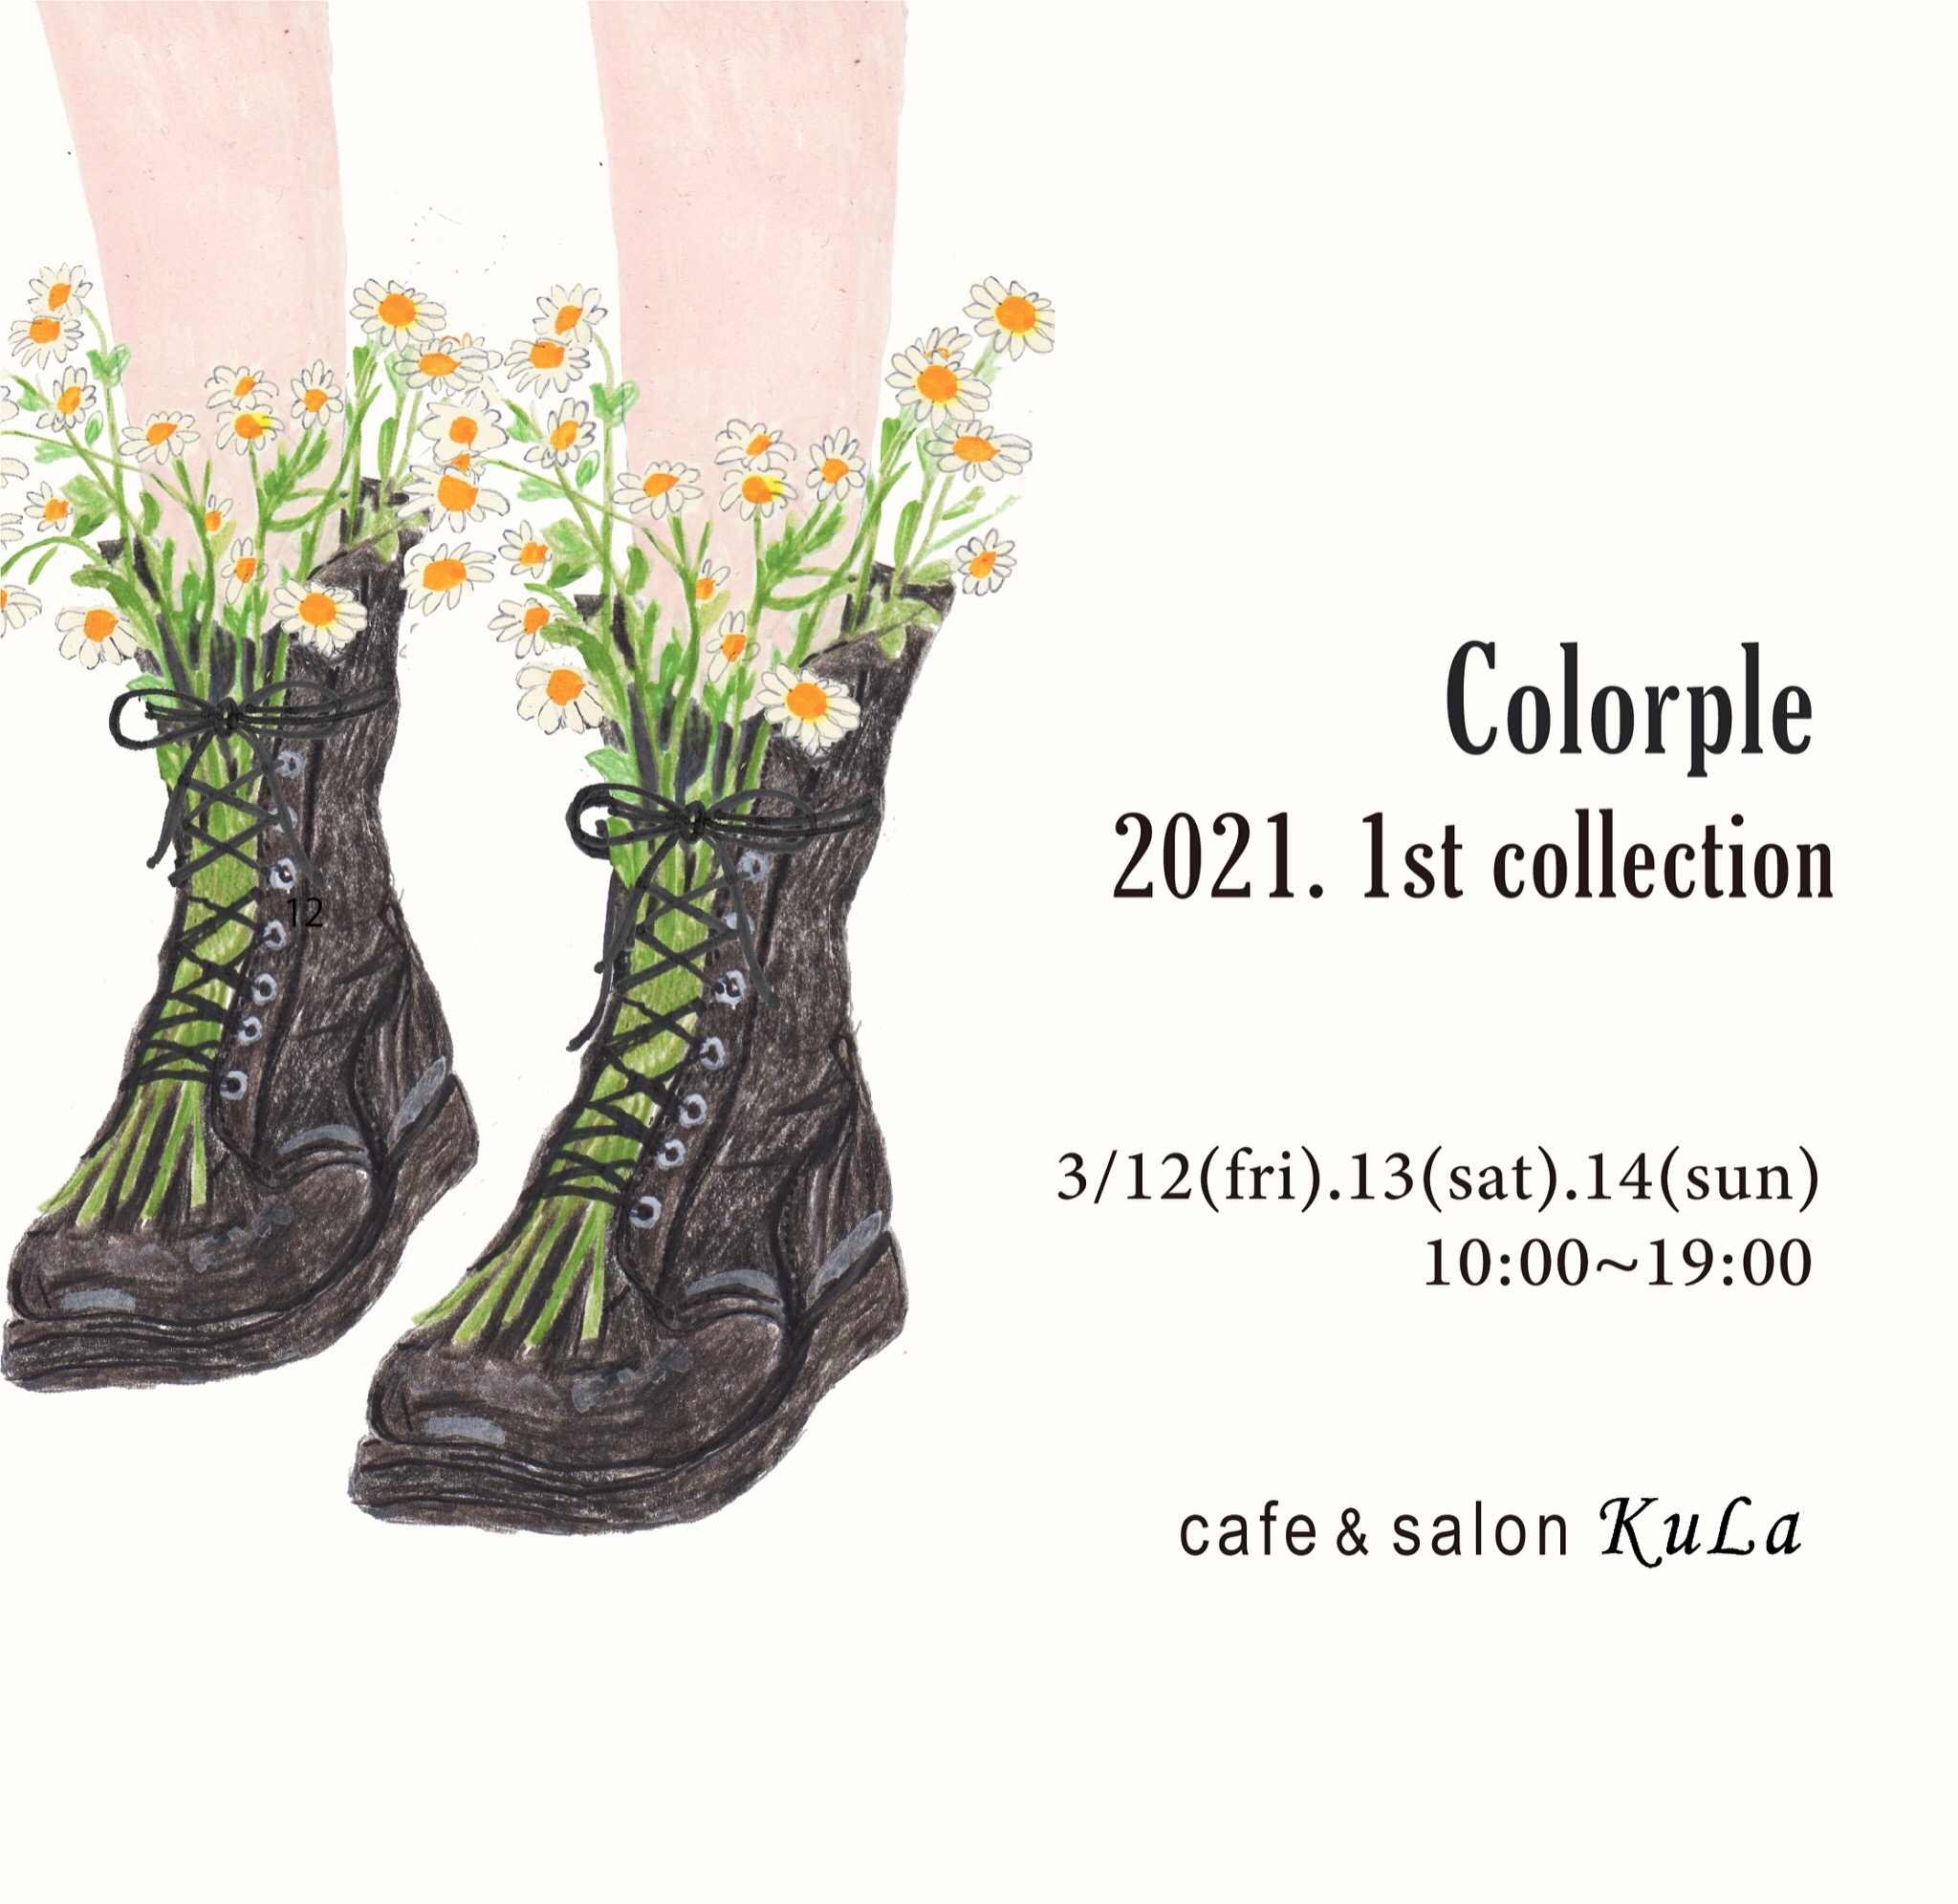 2021 1st collection 3/12.13.14